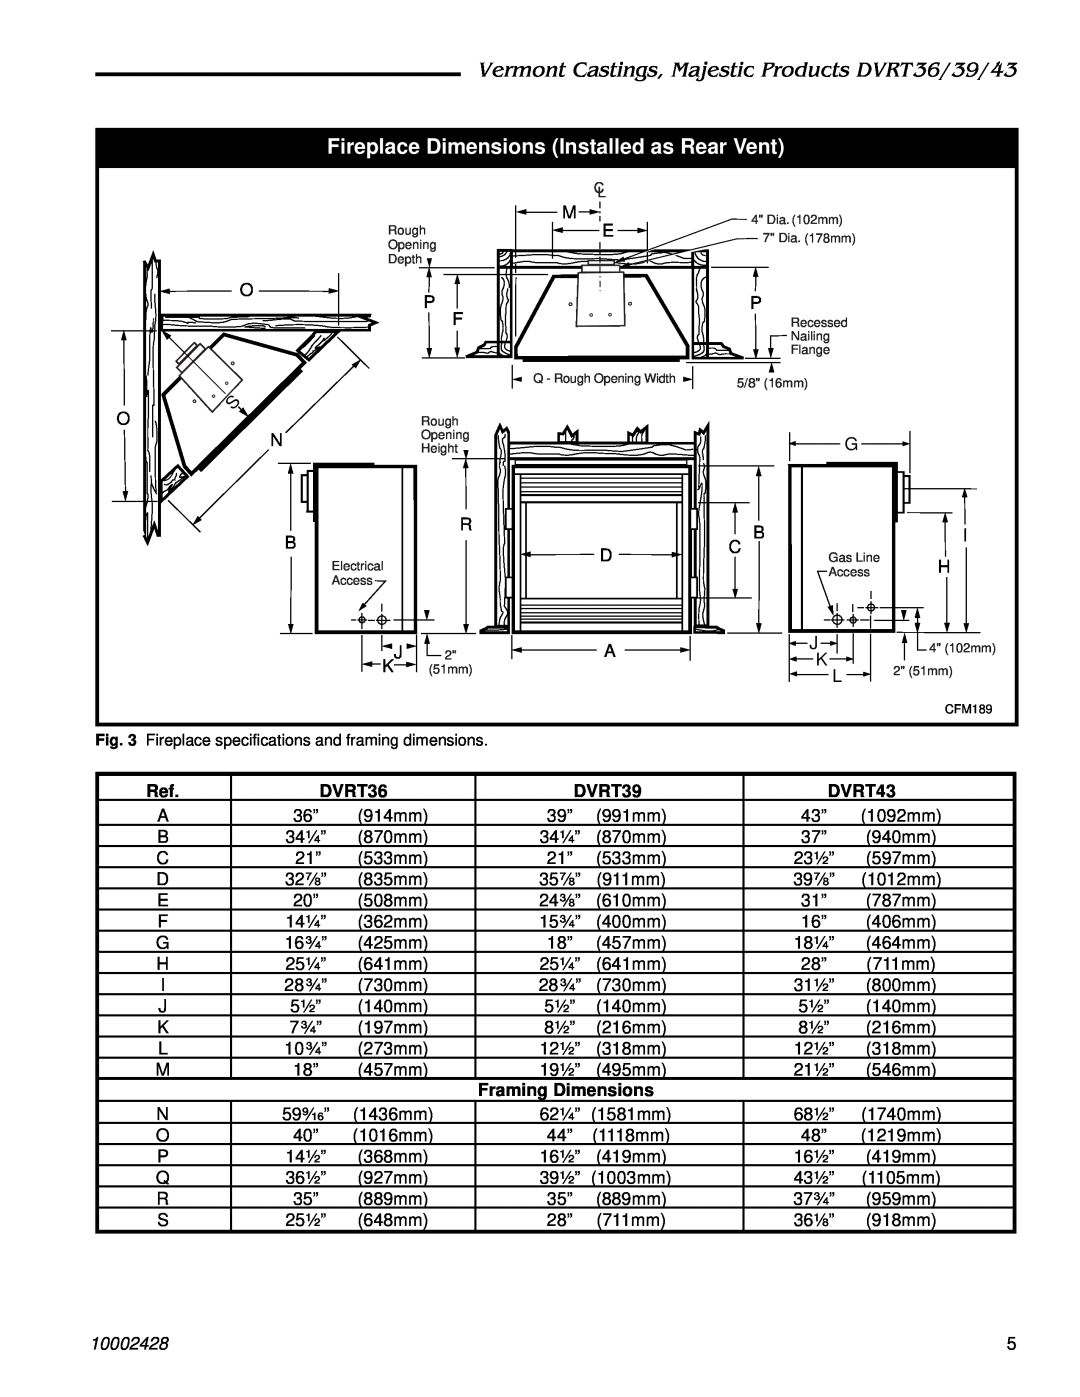 Vermont Casting DVRT39 manual Fireplace Dimensions Installed as Rear Vent, Vermont Castings, Majestic Products DVRT36/39/43 